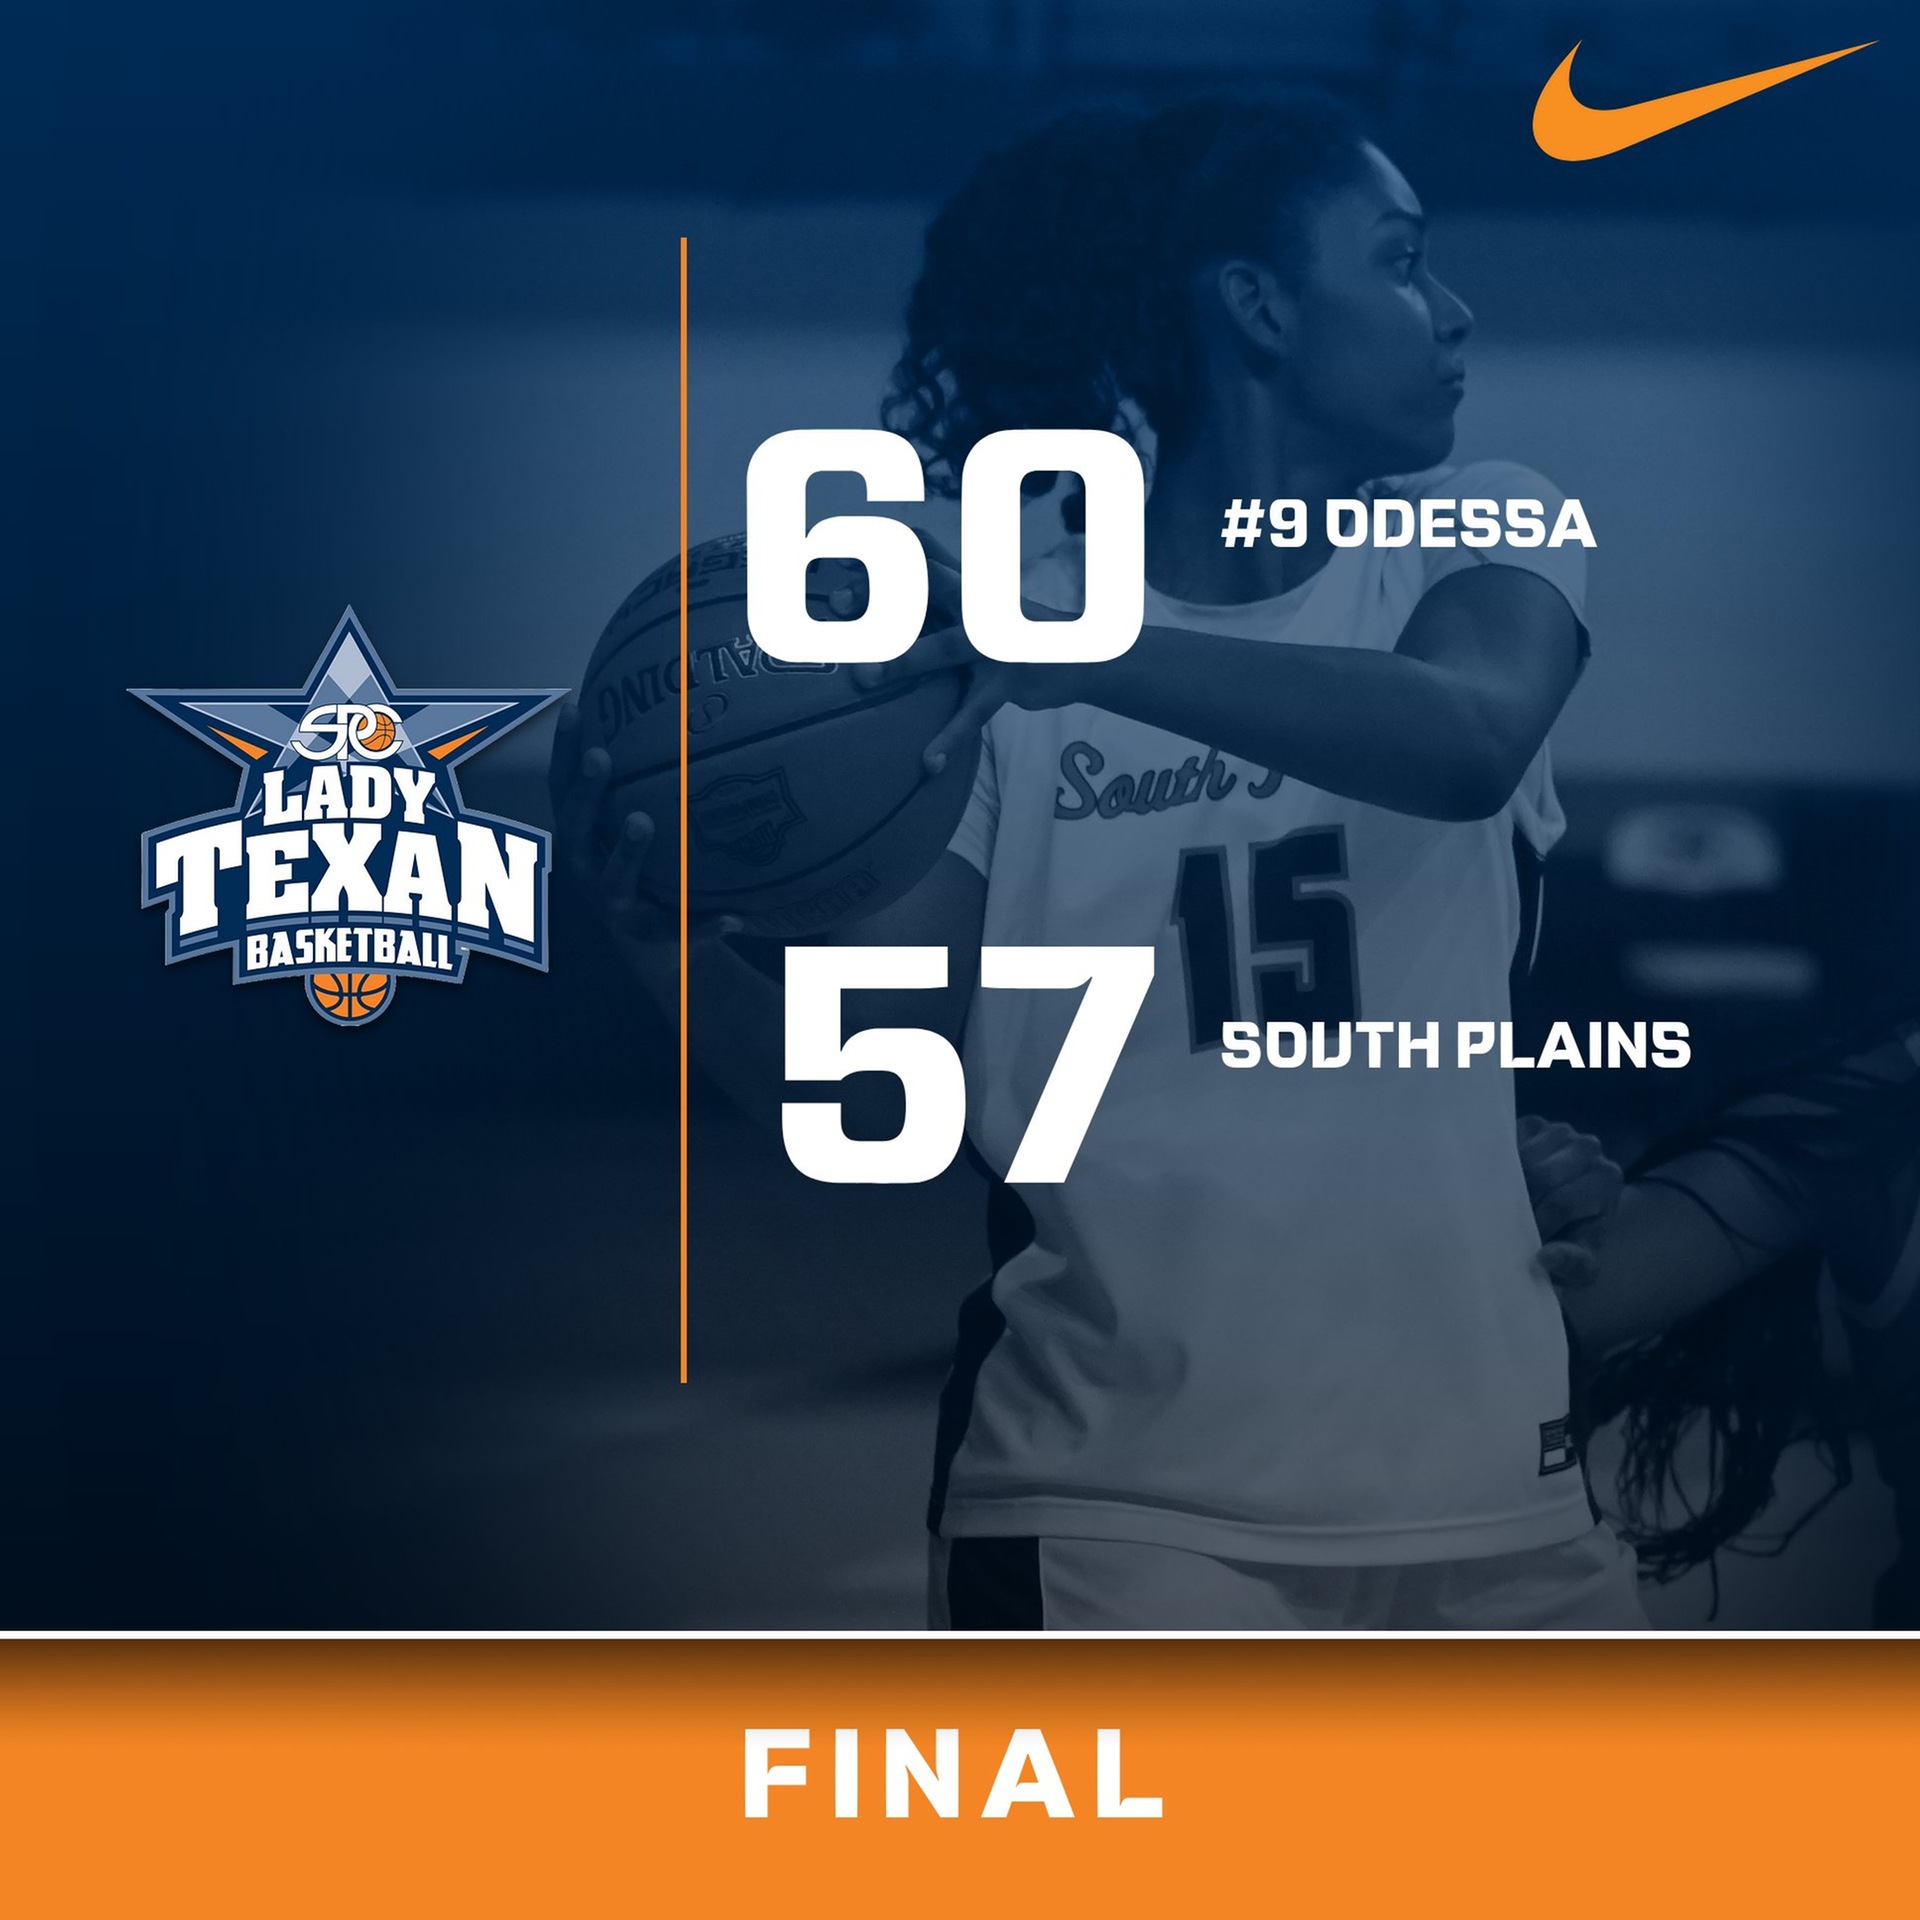 #9 Odessa holds off Lady Texans 60-57 Monday